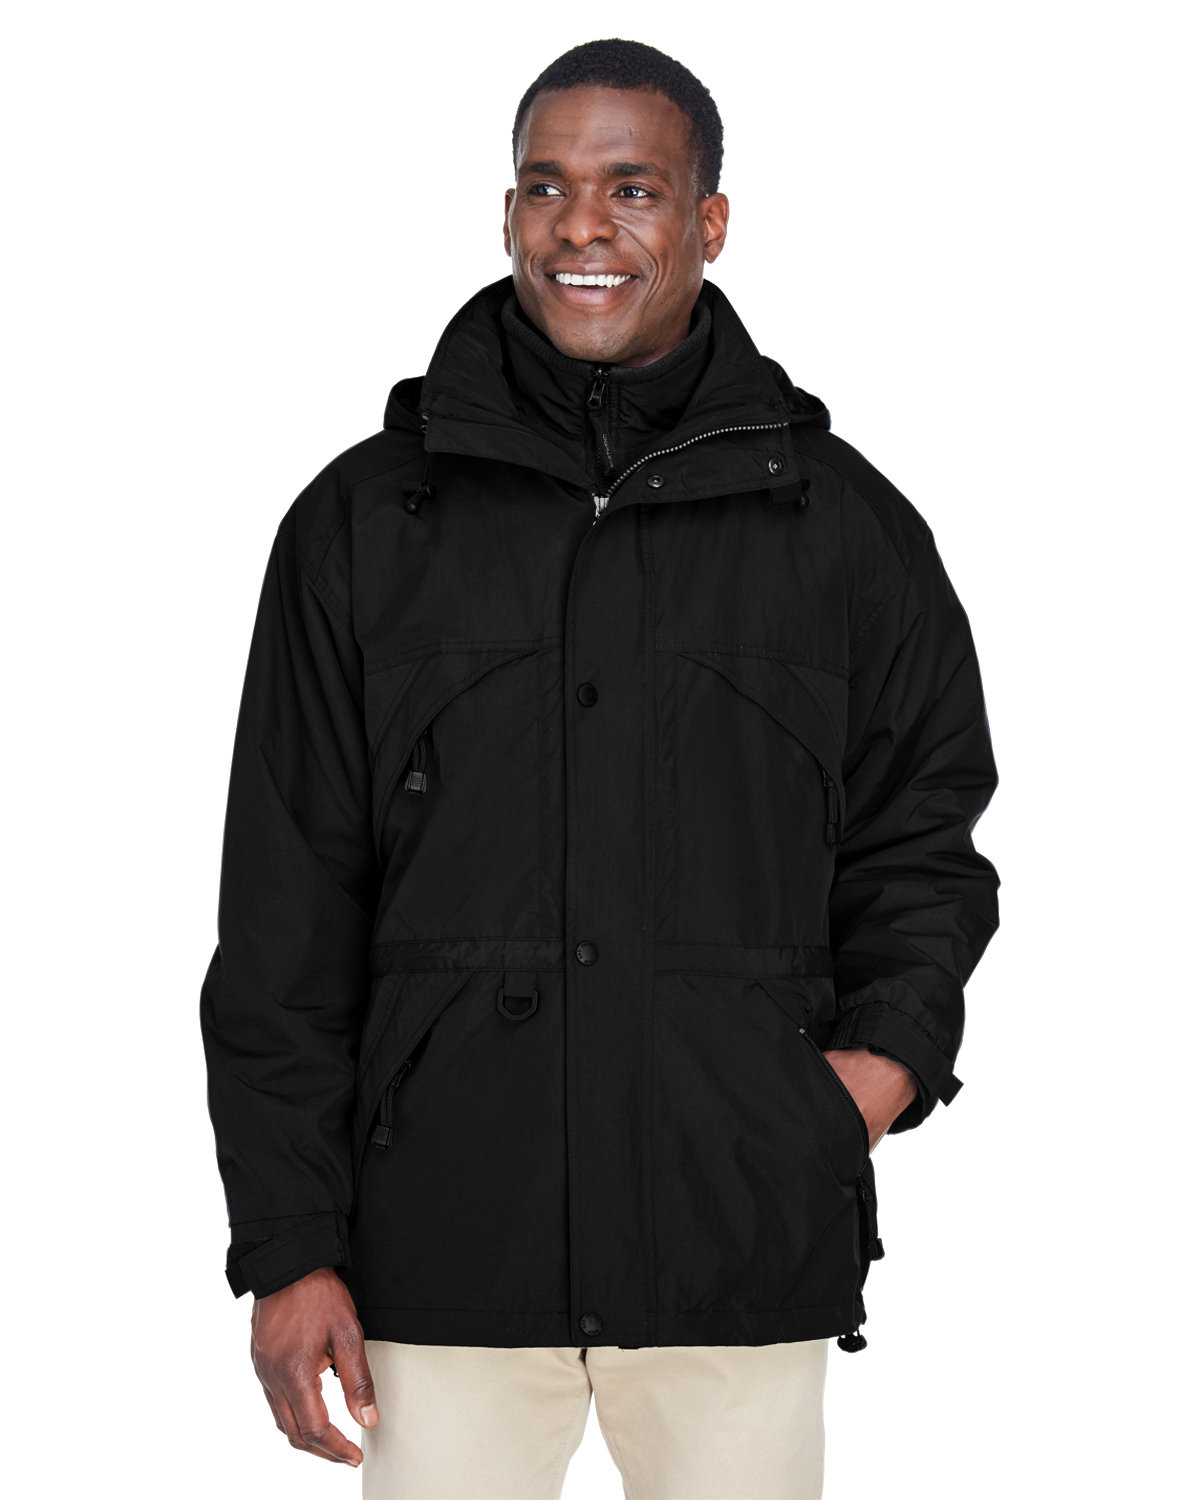 North End Adult 3-in-1 Parka with Dobby Trim | alphabroder